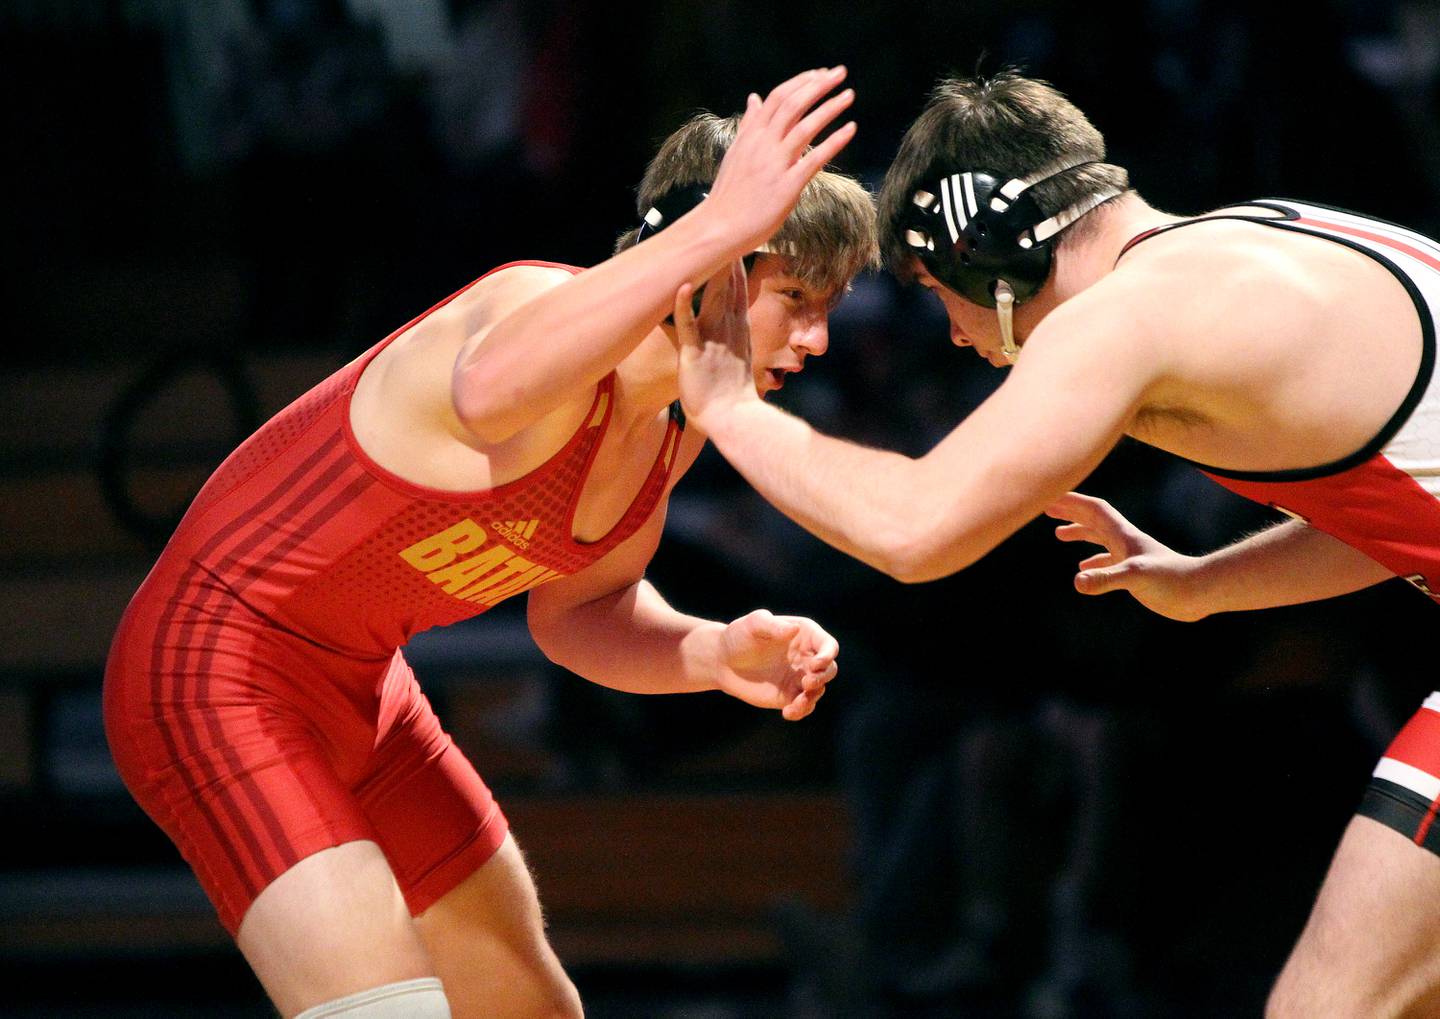 Batavia's Ben Brown (left) competes against Yorkville's Hunter Janeczko in the 195-pound weight class in a dual meet at Batavia on Wednesday, Jan. 26, 2022.